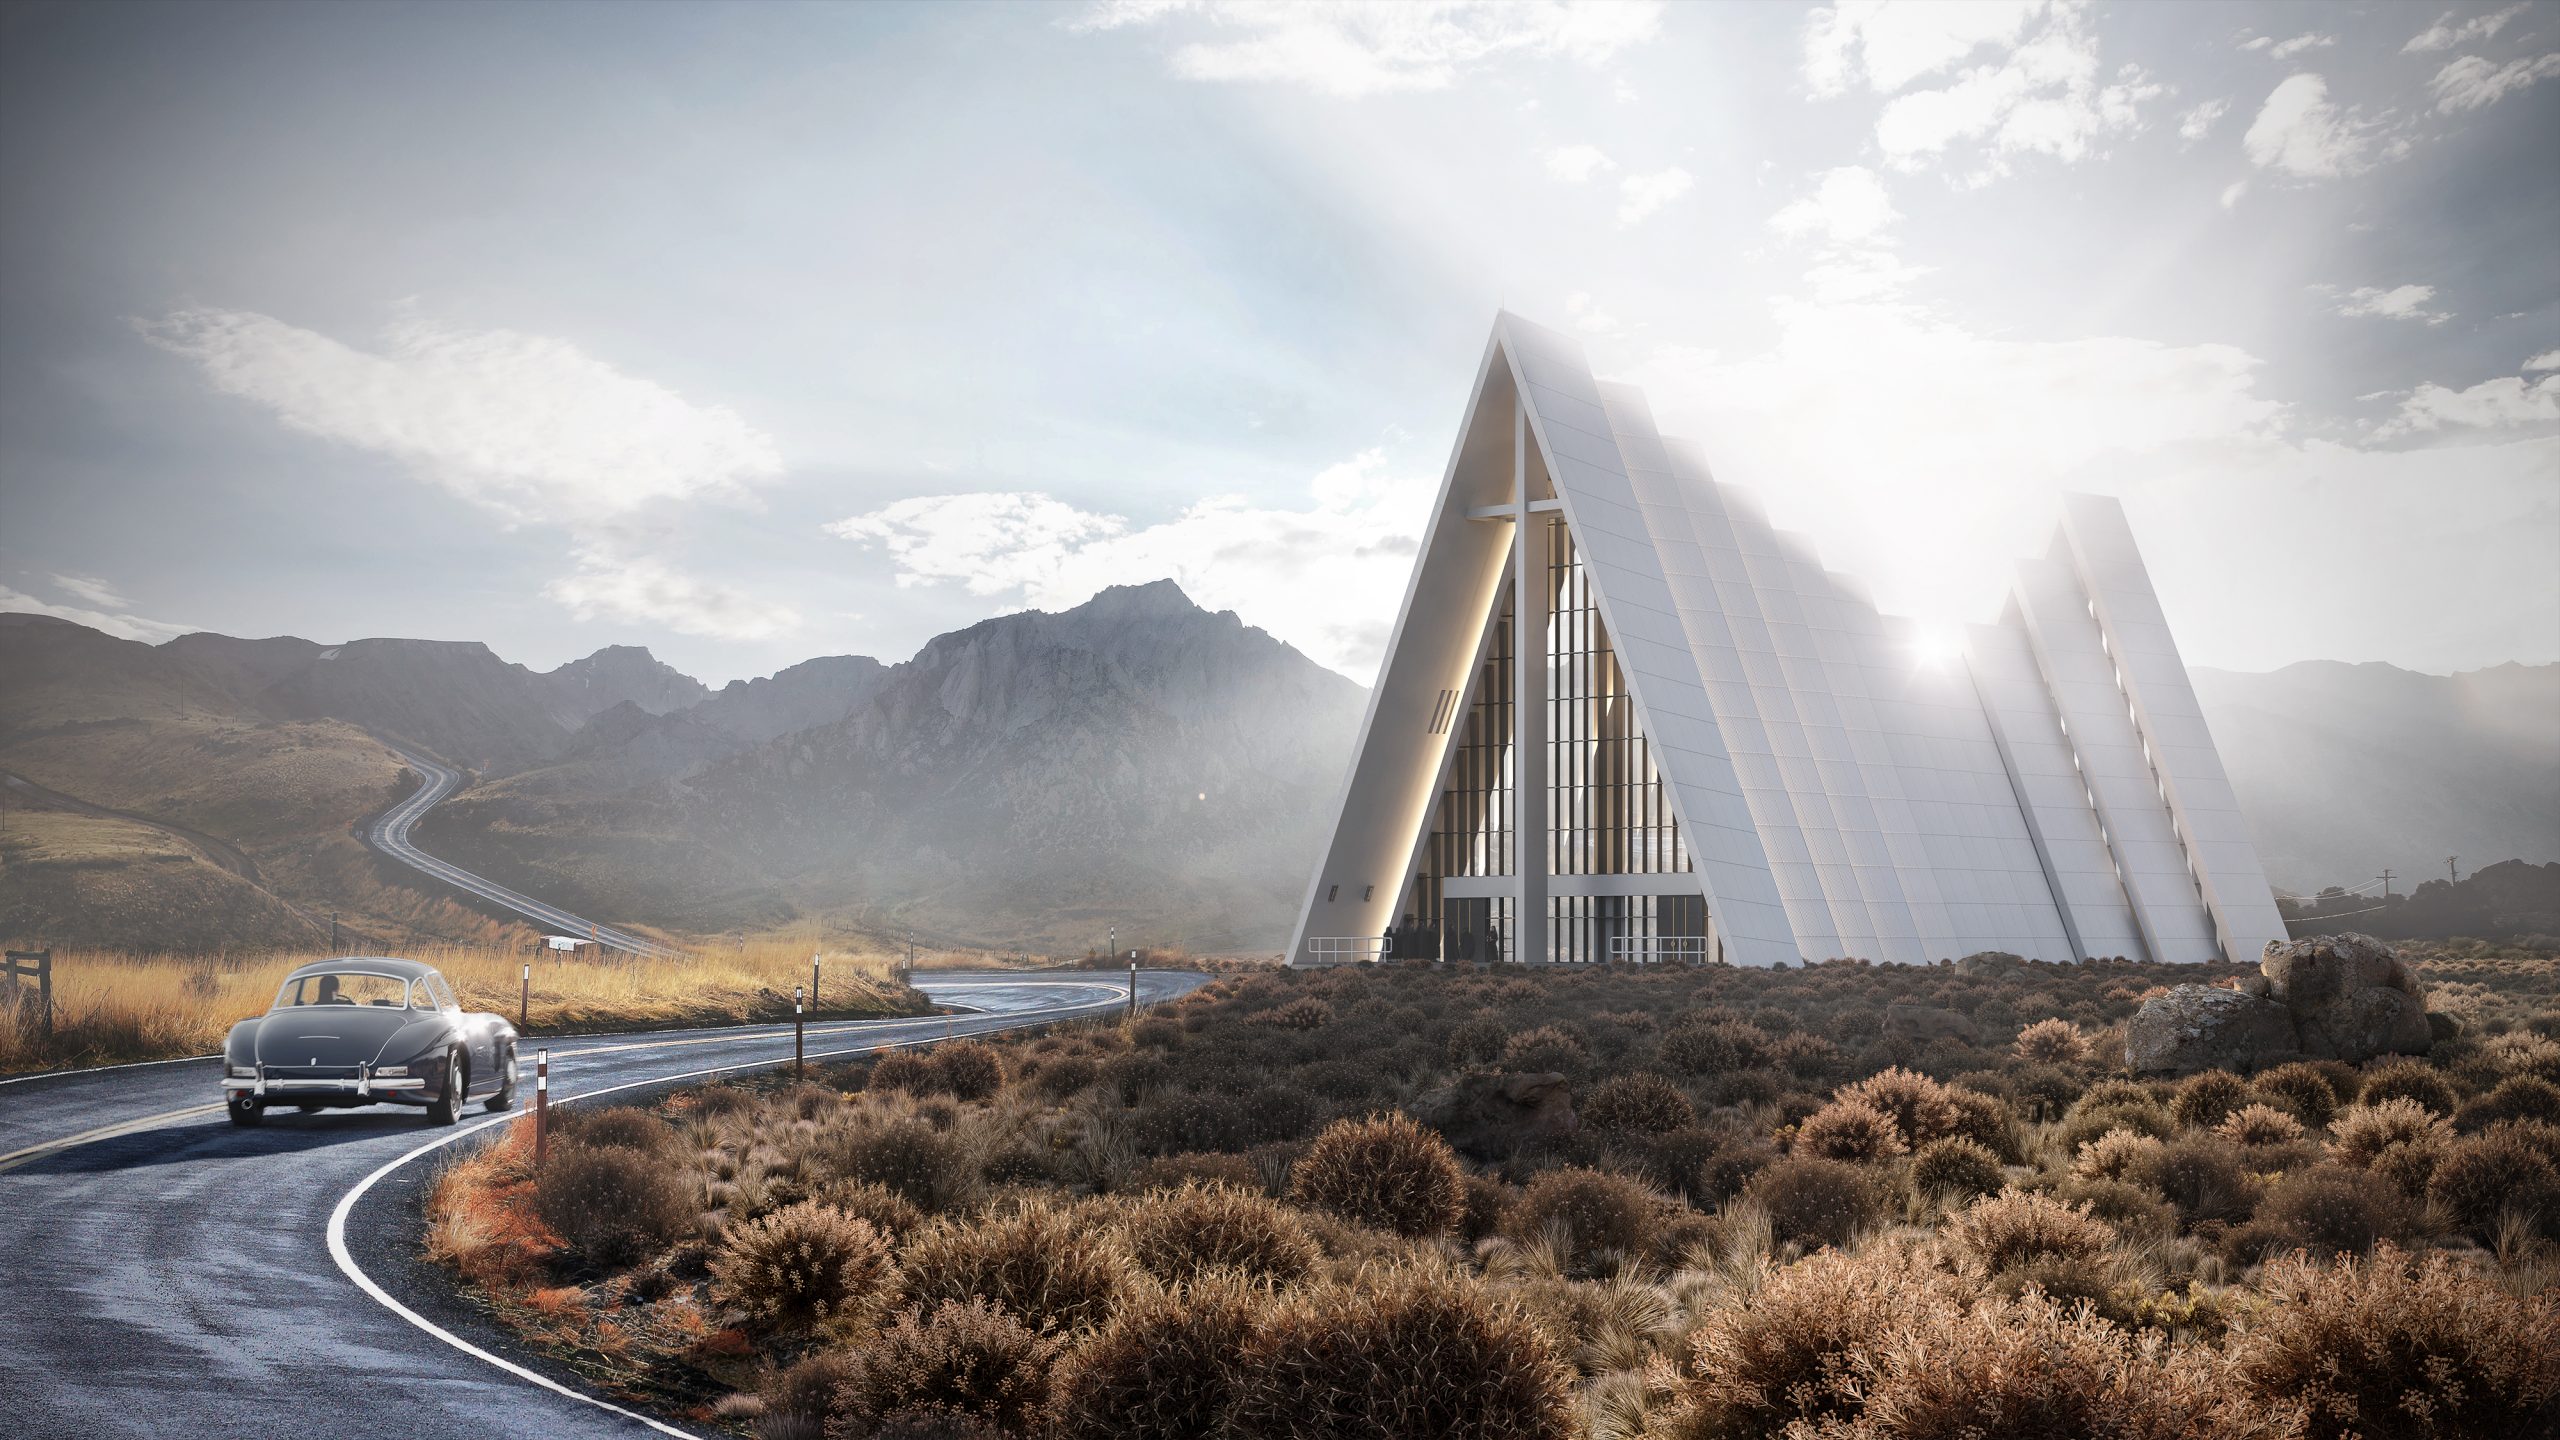 Photoreal Modeling and Rendering for a Stunning Church Architectural Design